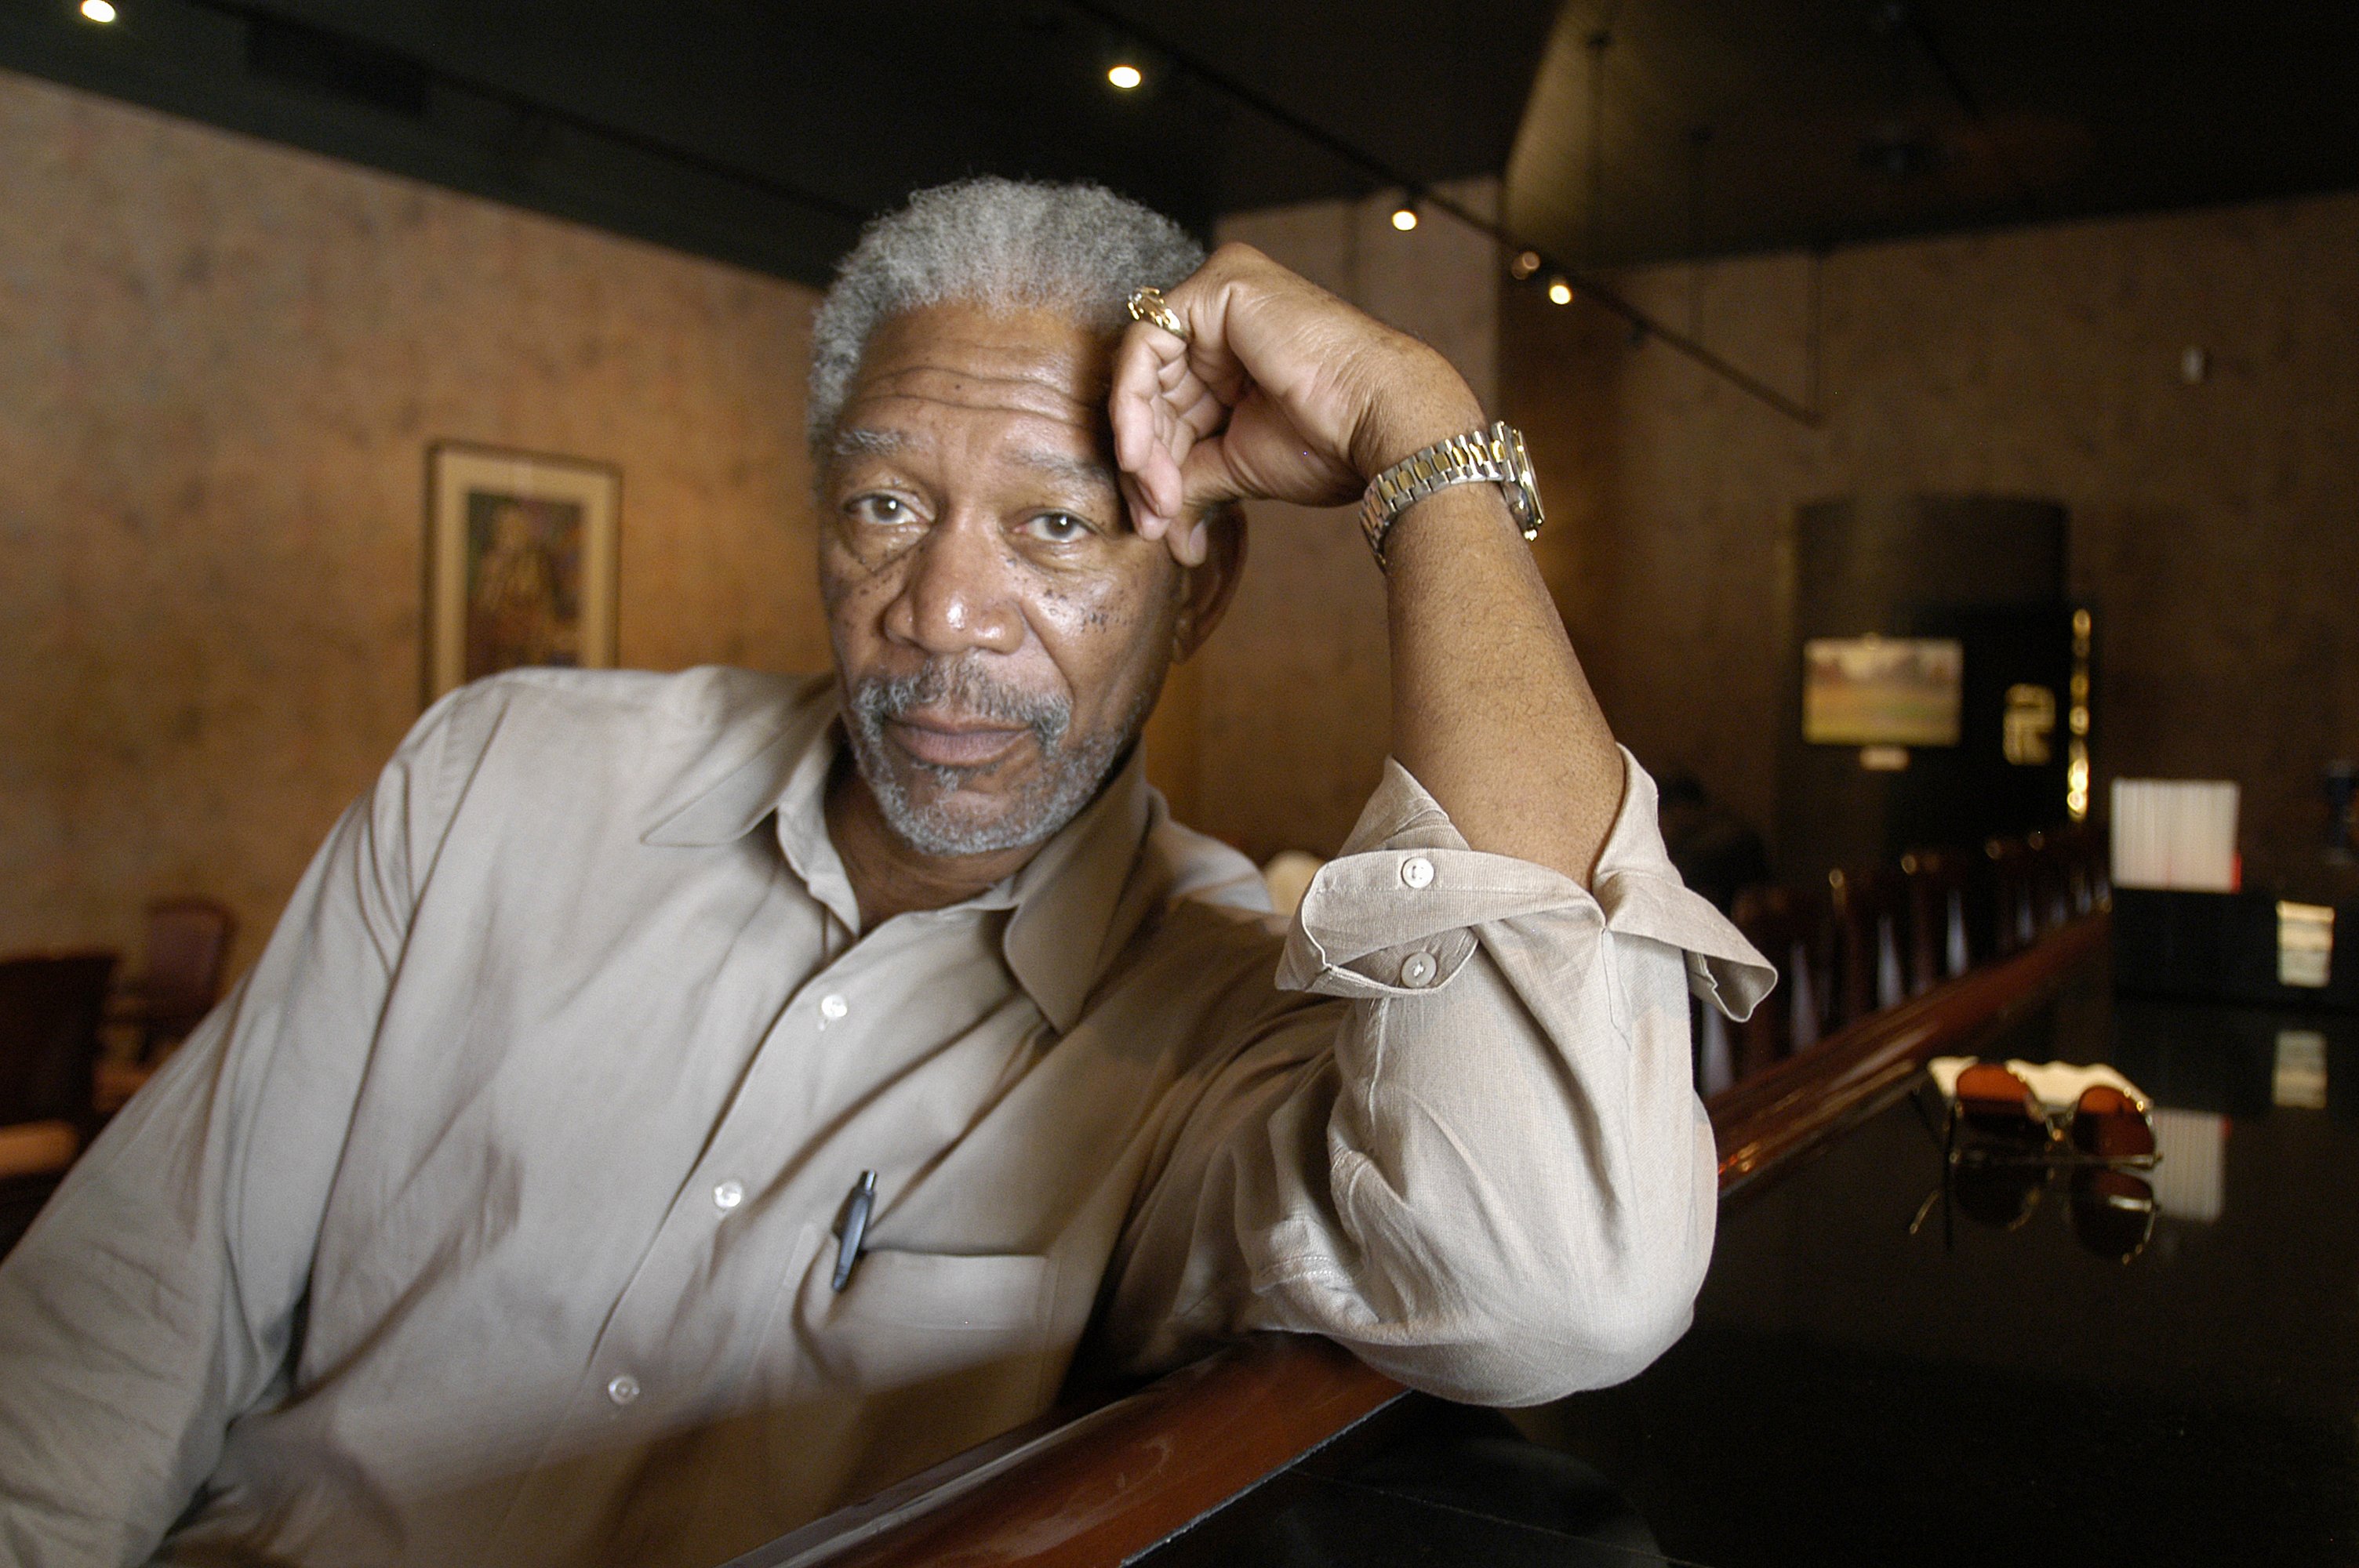 Morgan Freeman at his upscale restaurant Madidi on September 23, 2005, in Clarksdale, Mississippi. | Source: James Patterson/Getty Images